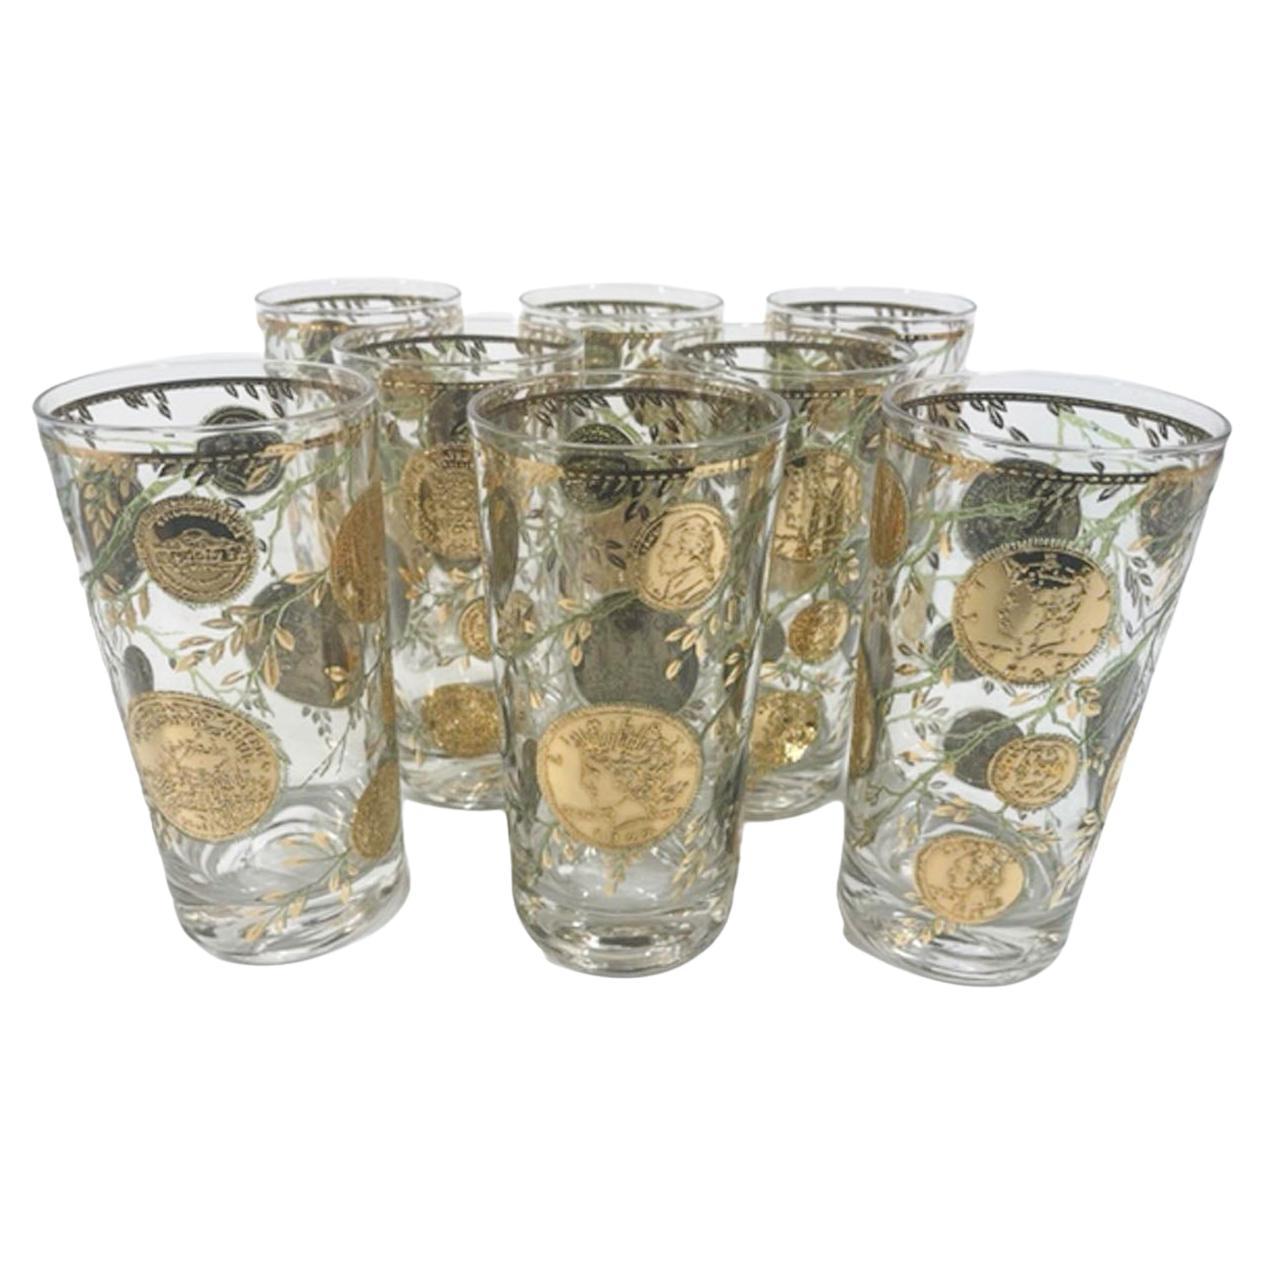 Vintage Highball Glasses by Culver, Ltd. in the 'Midas' Pattern with 22k Gold For Sale